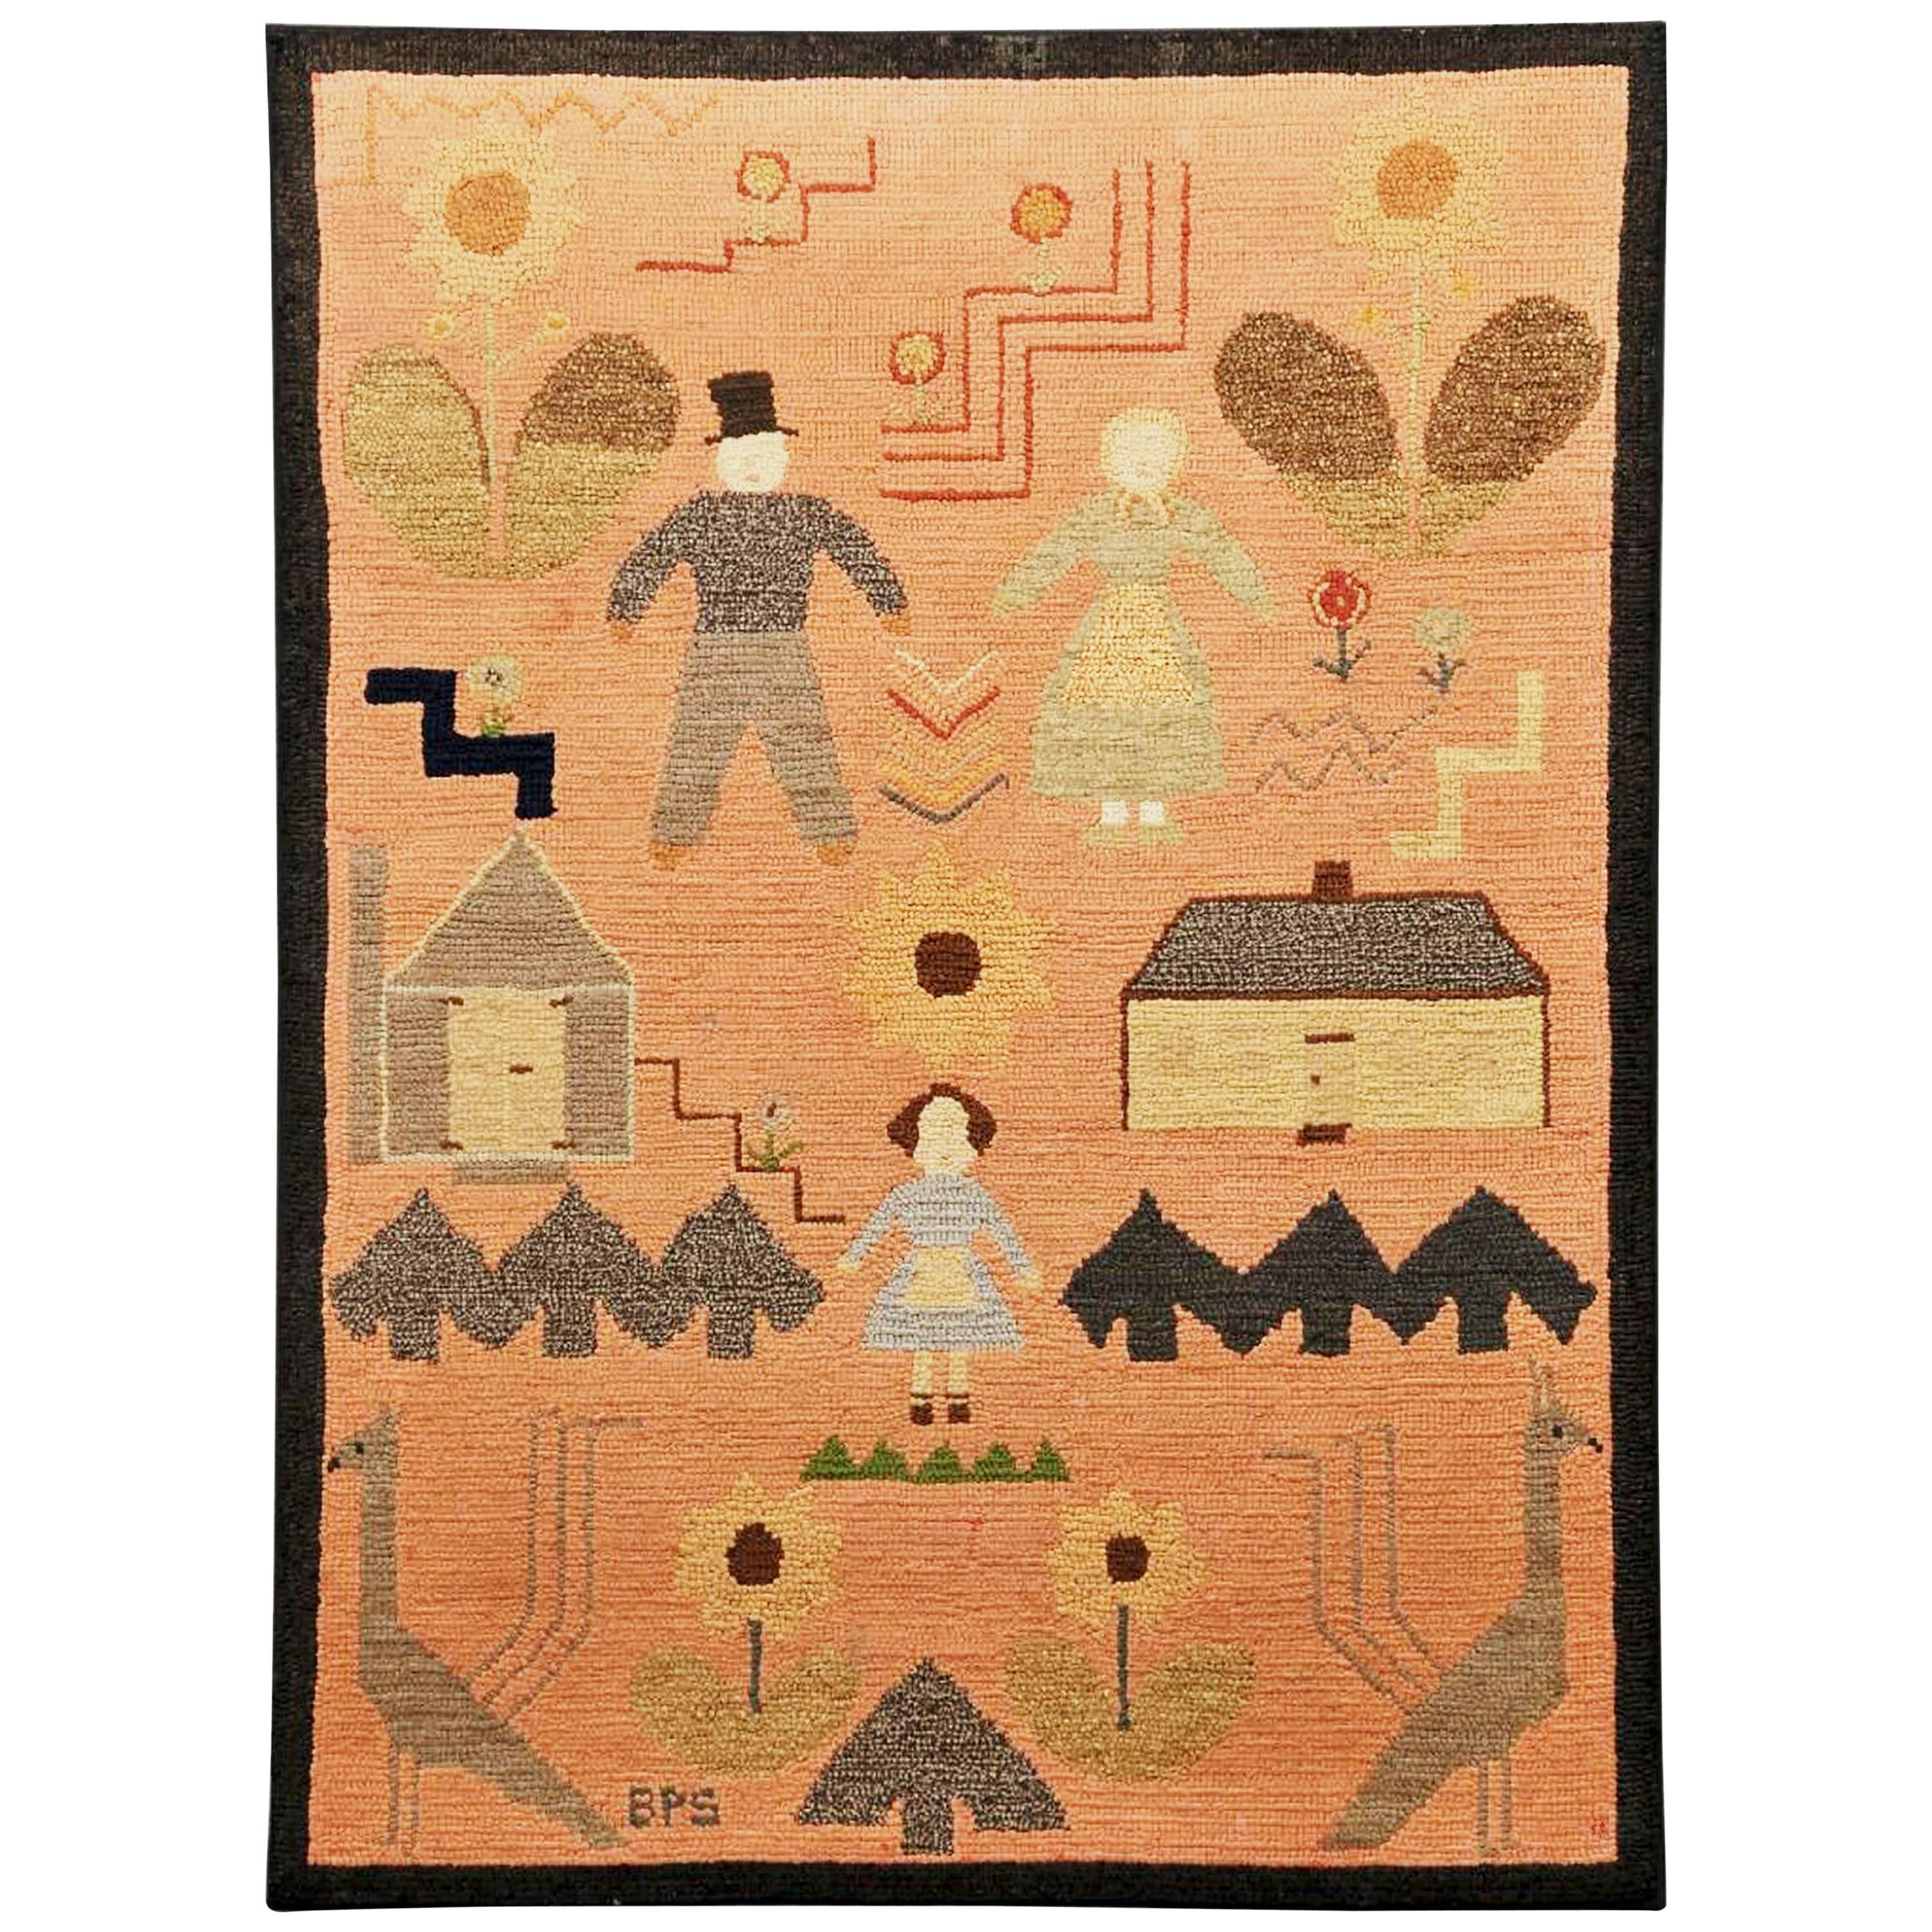 American Folk Art Pictorial Hooked Rug, Mounted on Stretcher, Late 19th Century